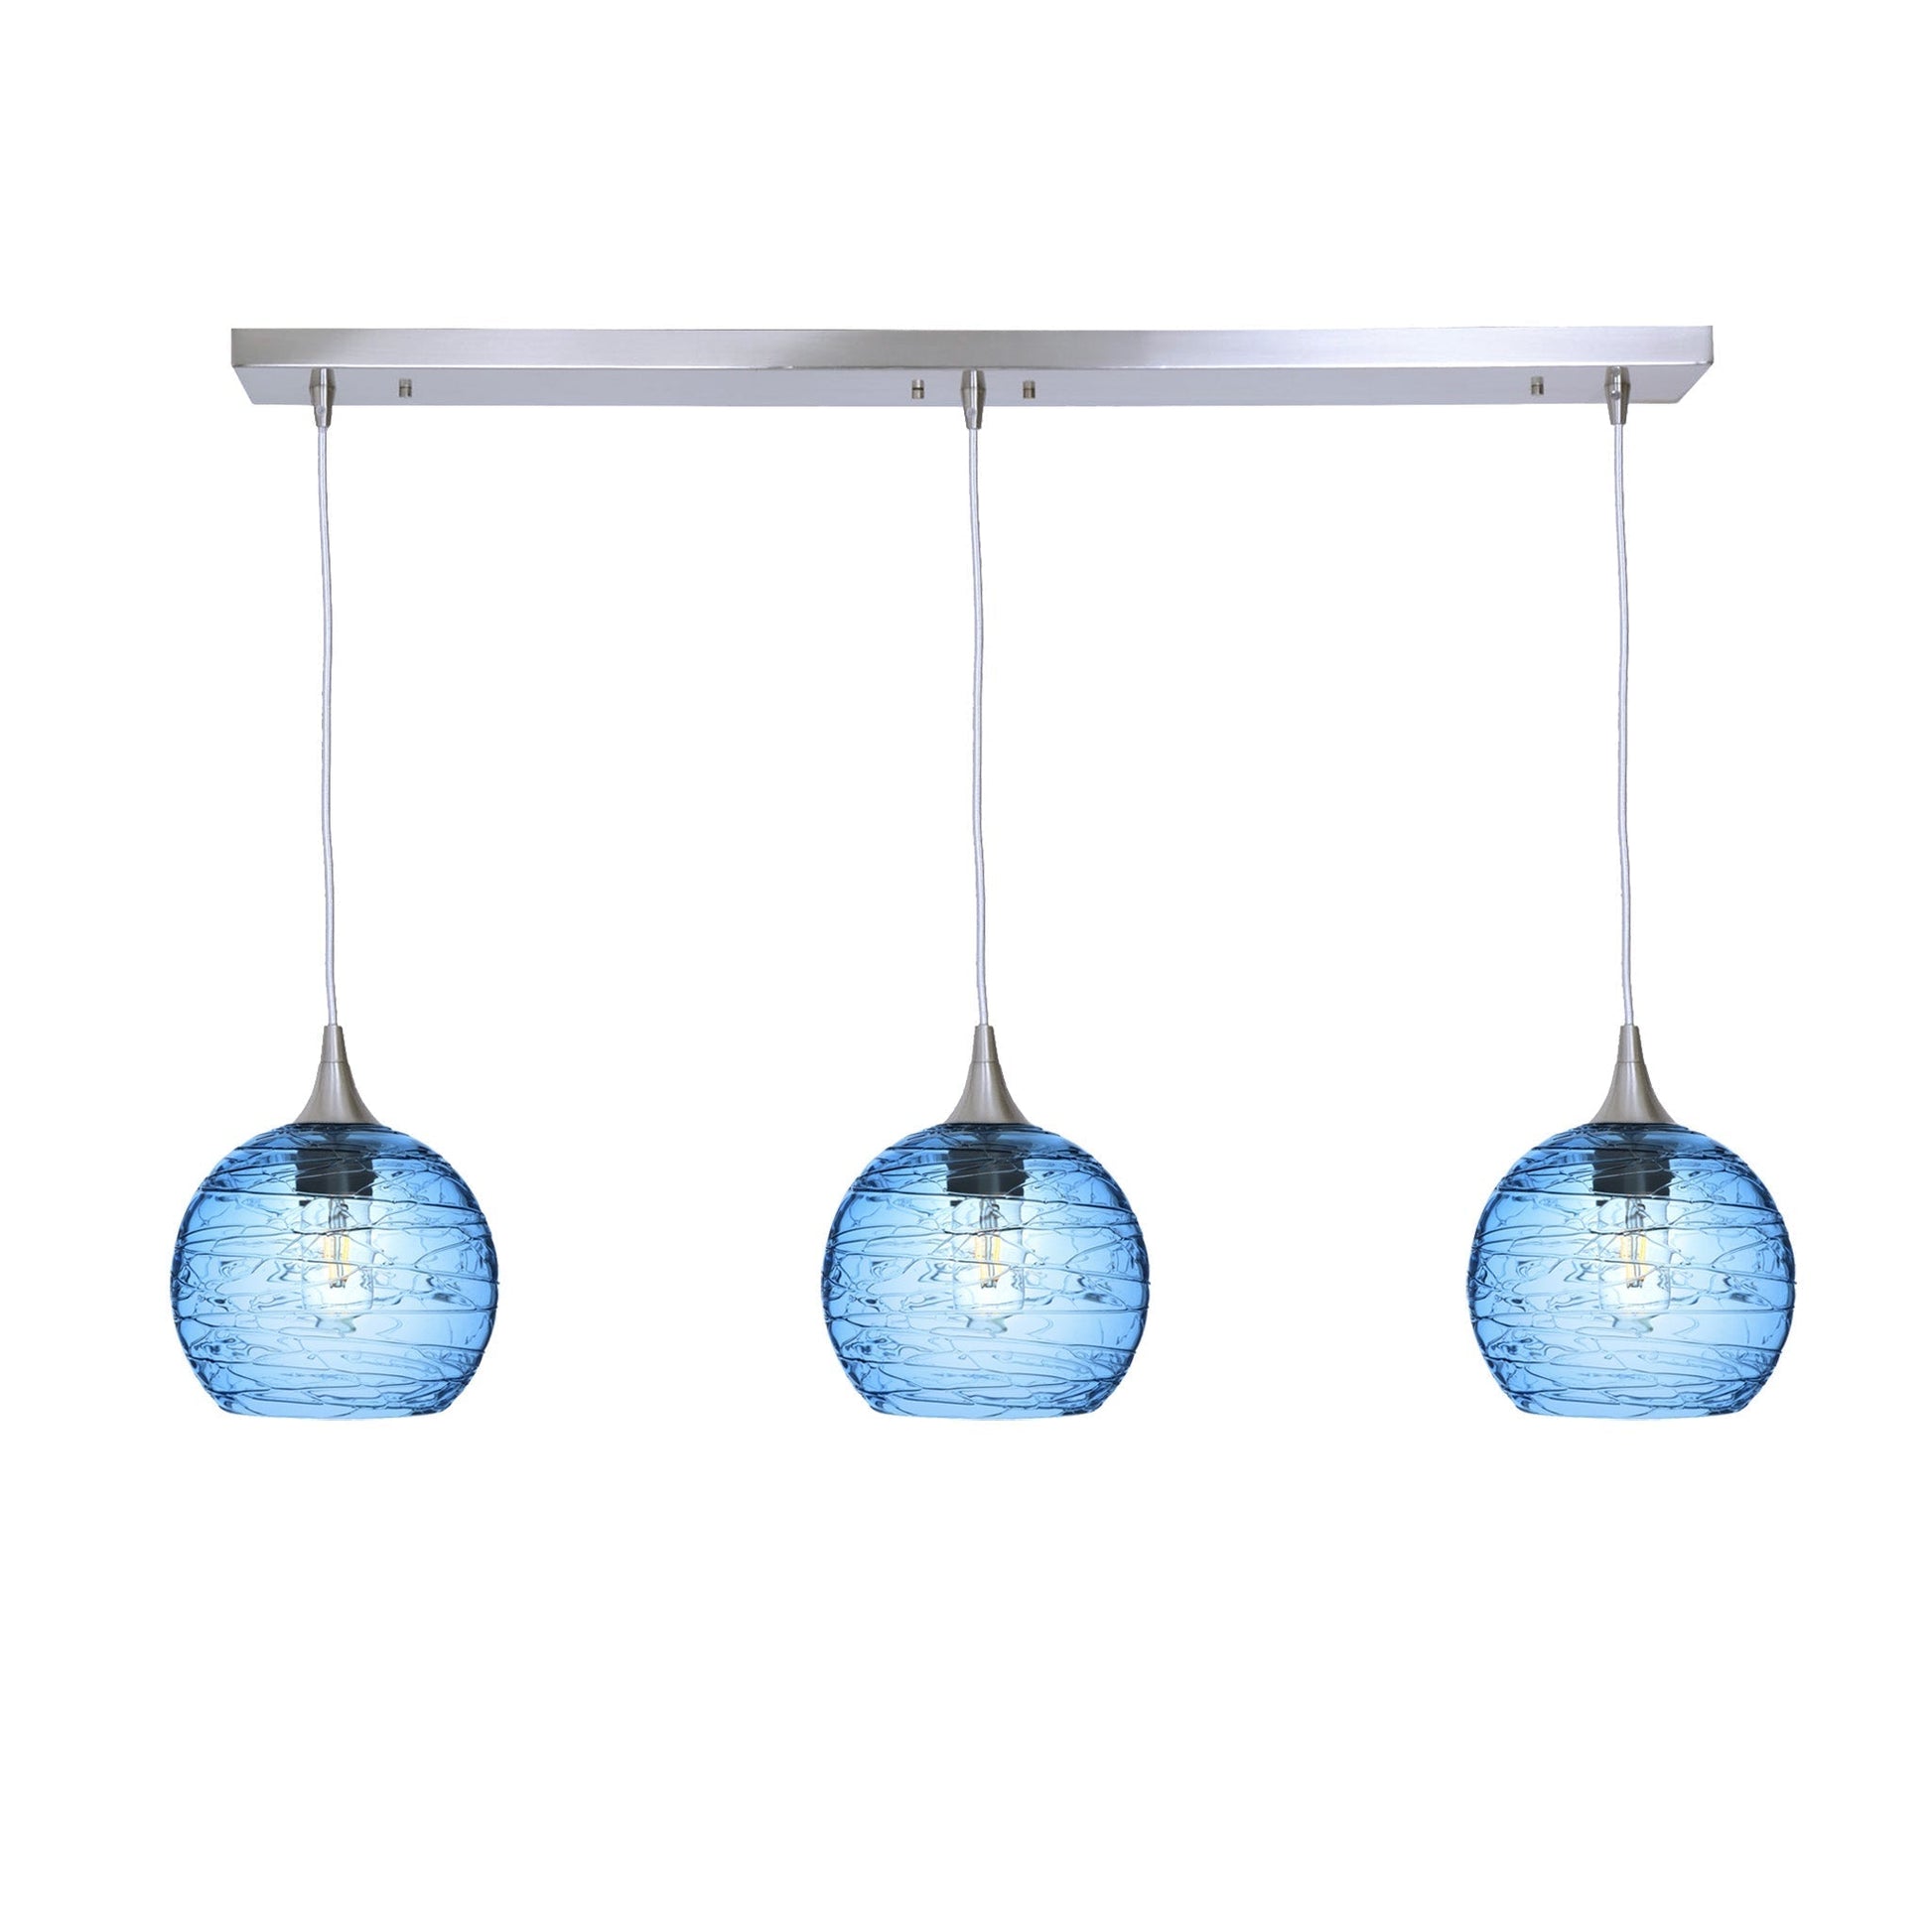 767 Spun: 3 Pendant Linear Chandelier-Glass-Bicycle Glass Co - Hotshop-Steel Blue-Brushed Nickel-Bicycle Glass Co